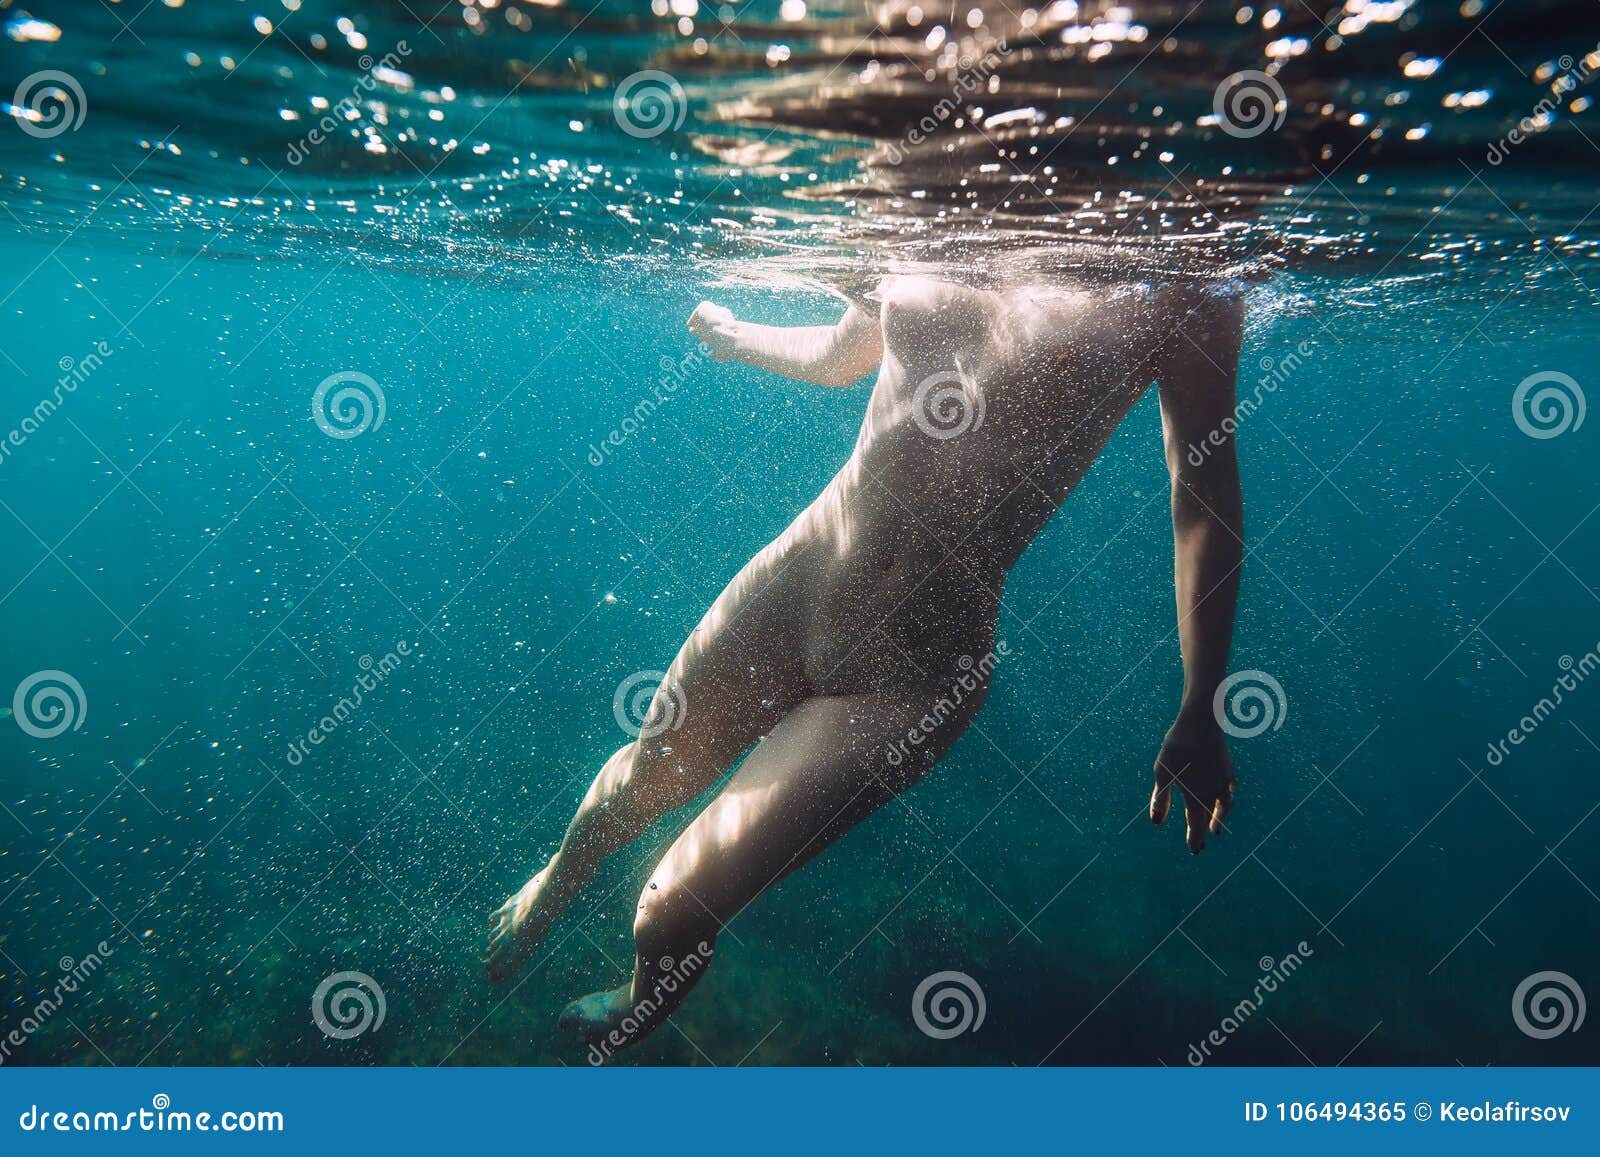 diane vanessa recommends nude women under water pic